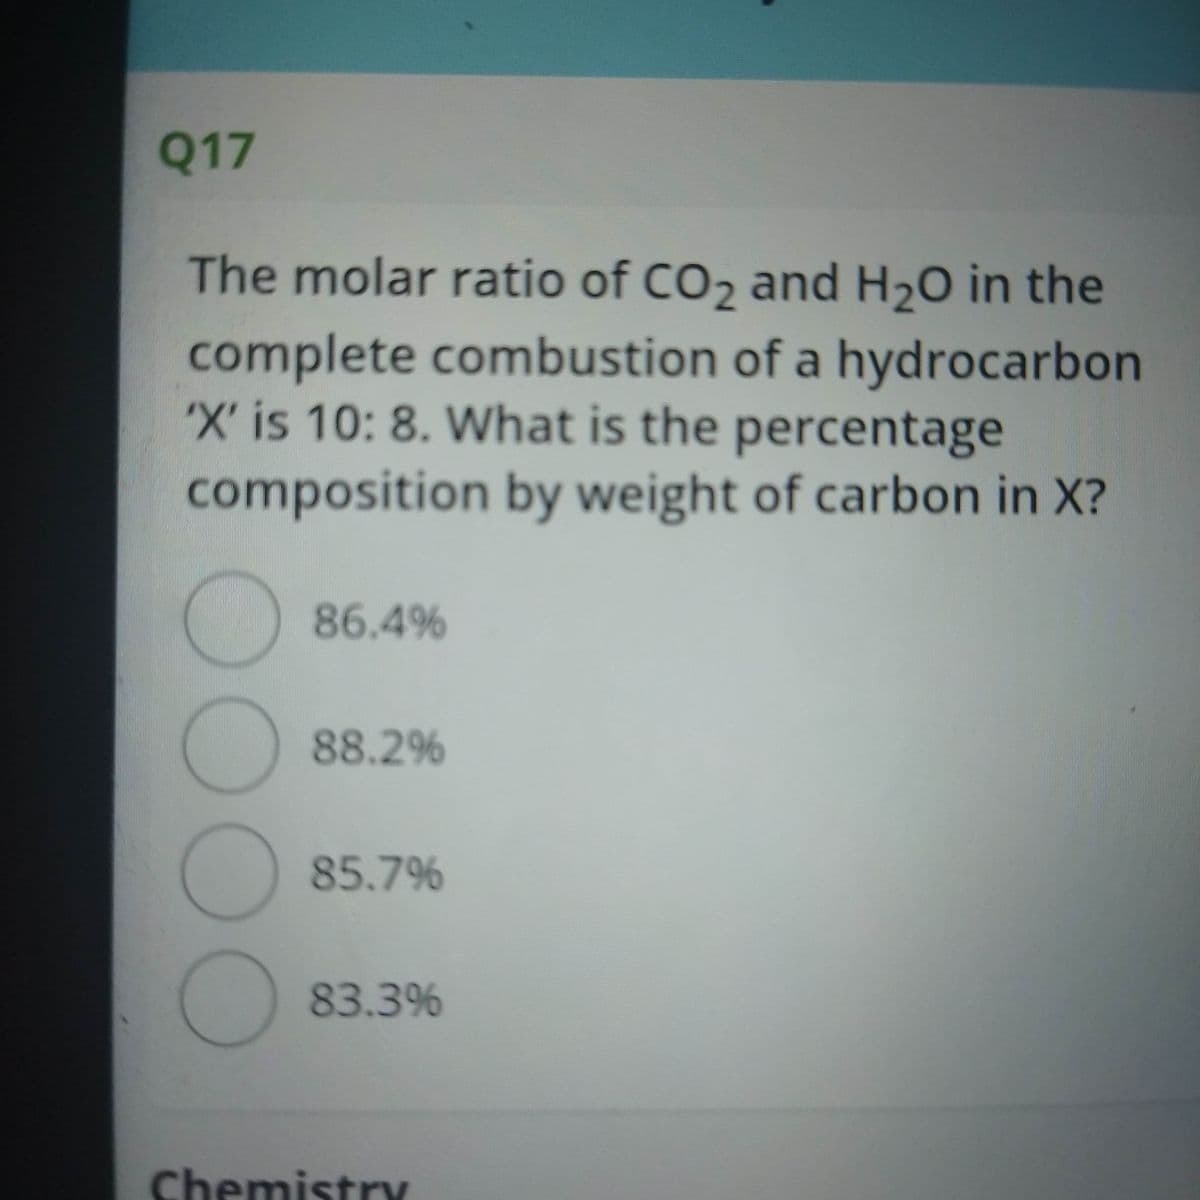 Q17
The molar ratio of CO2 and H20 in the
complete combustion of a hydrocarbon
'X' is 10: 8. What is the percentage
composition by weight of carbon in X?
86.4%
88.2%
85.7%
83.3%
Chemistry
